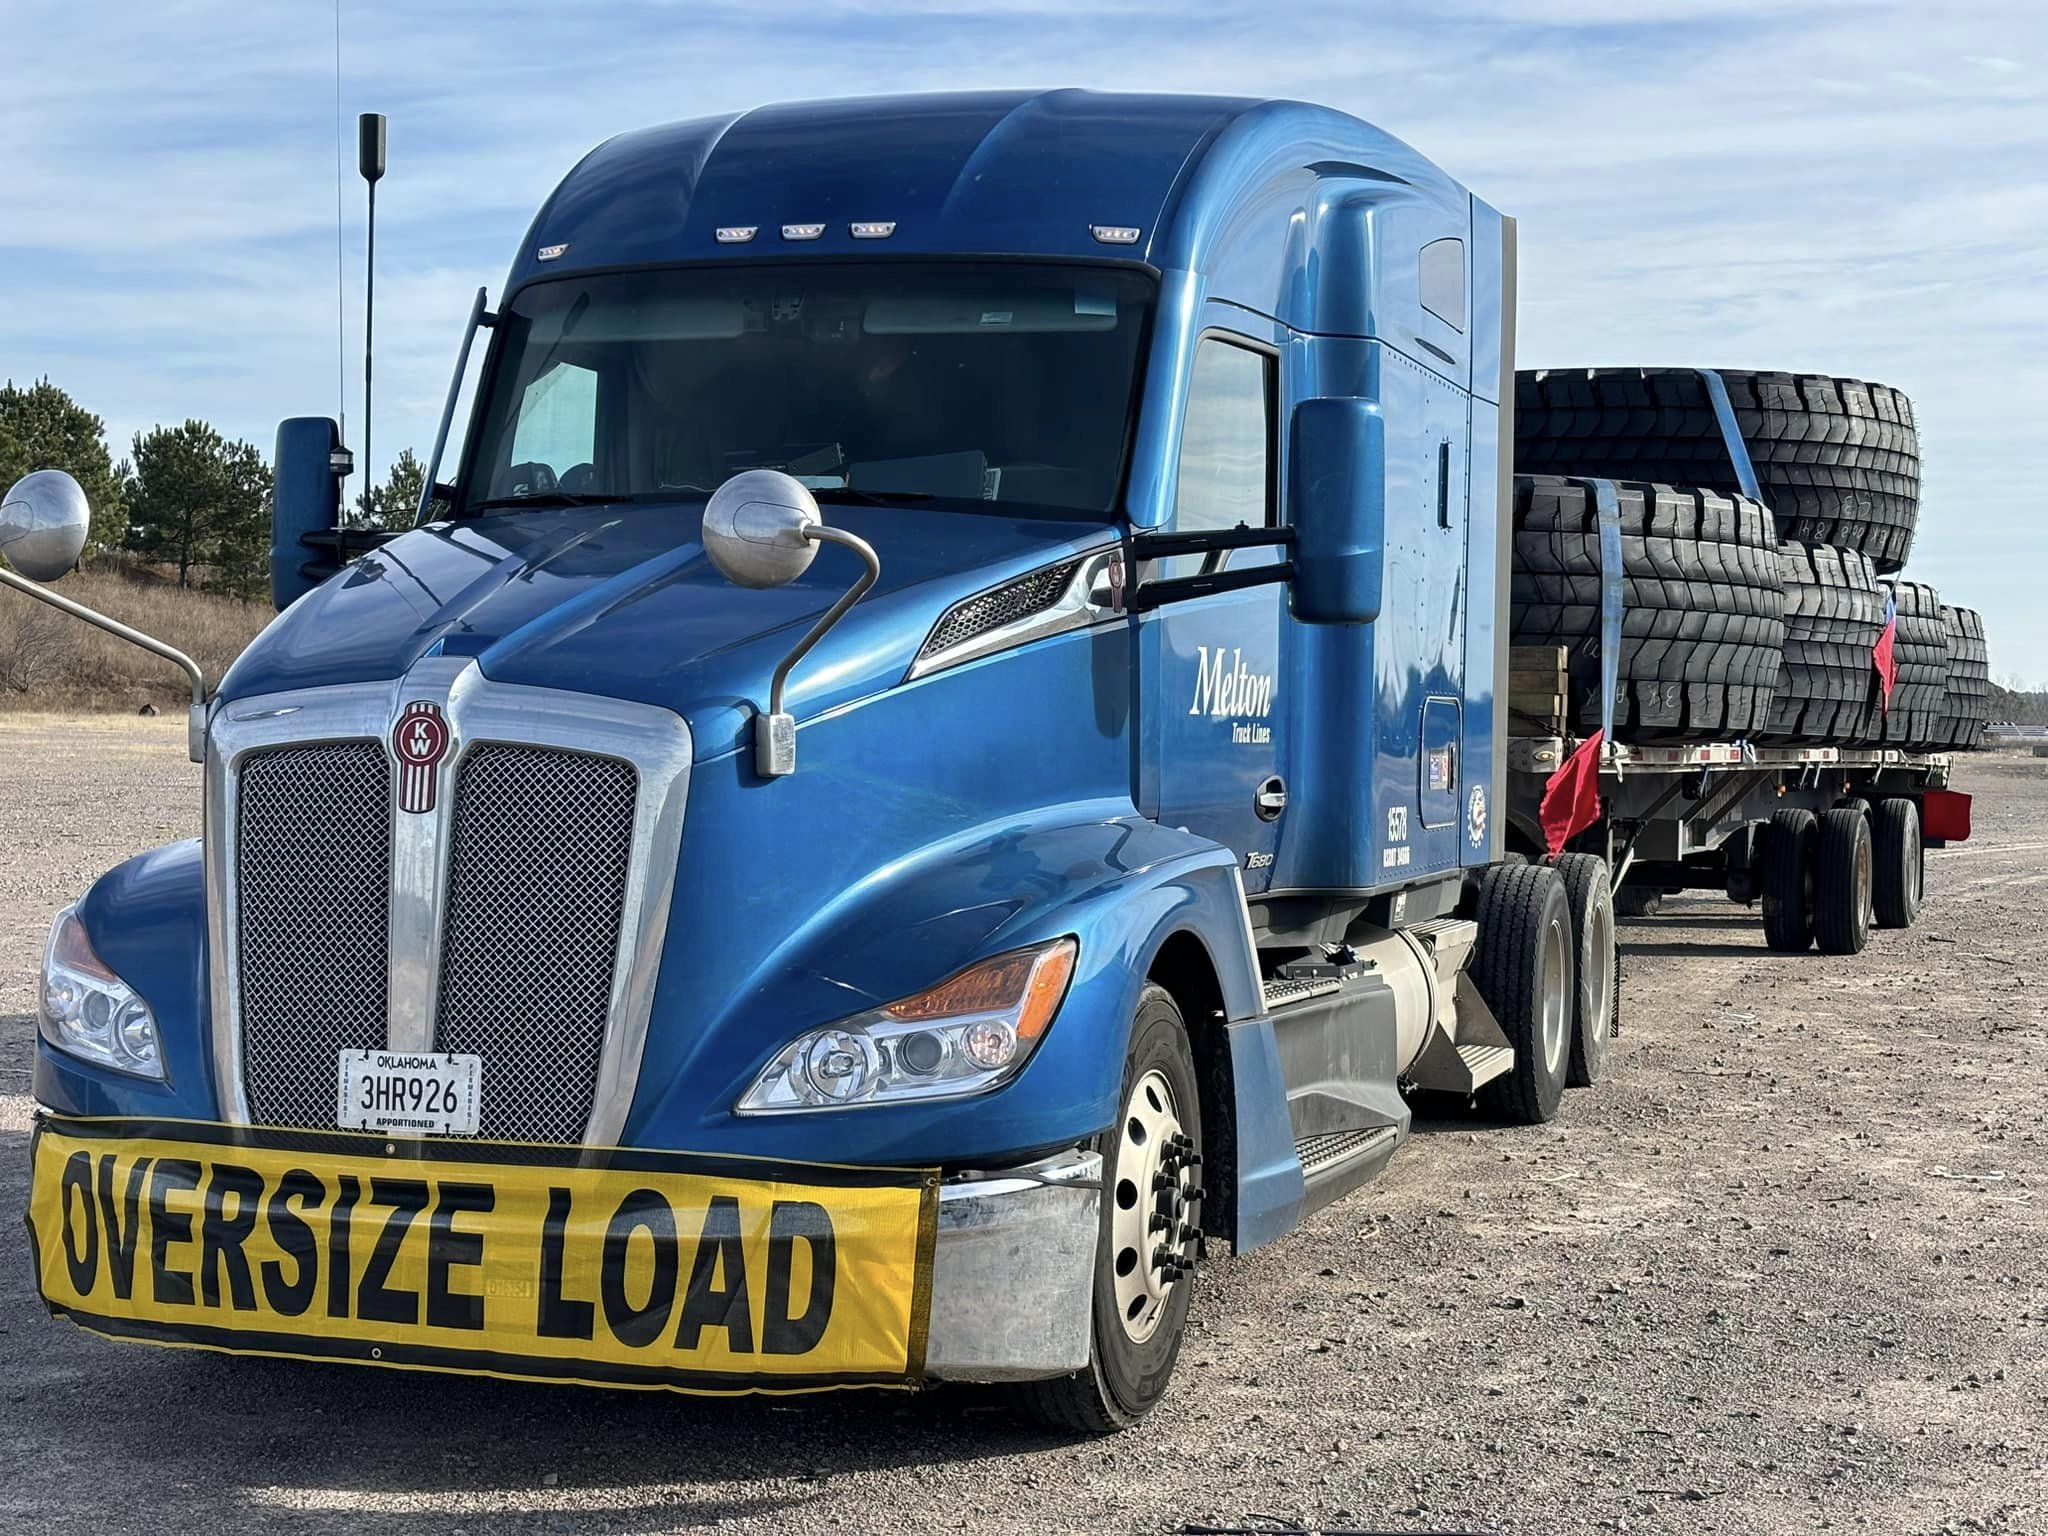 Overdimensional load of tires hauled by a Melton truck